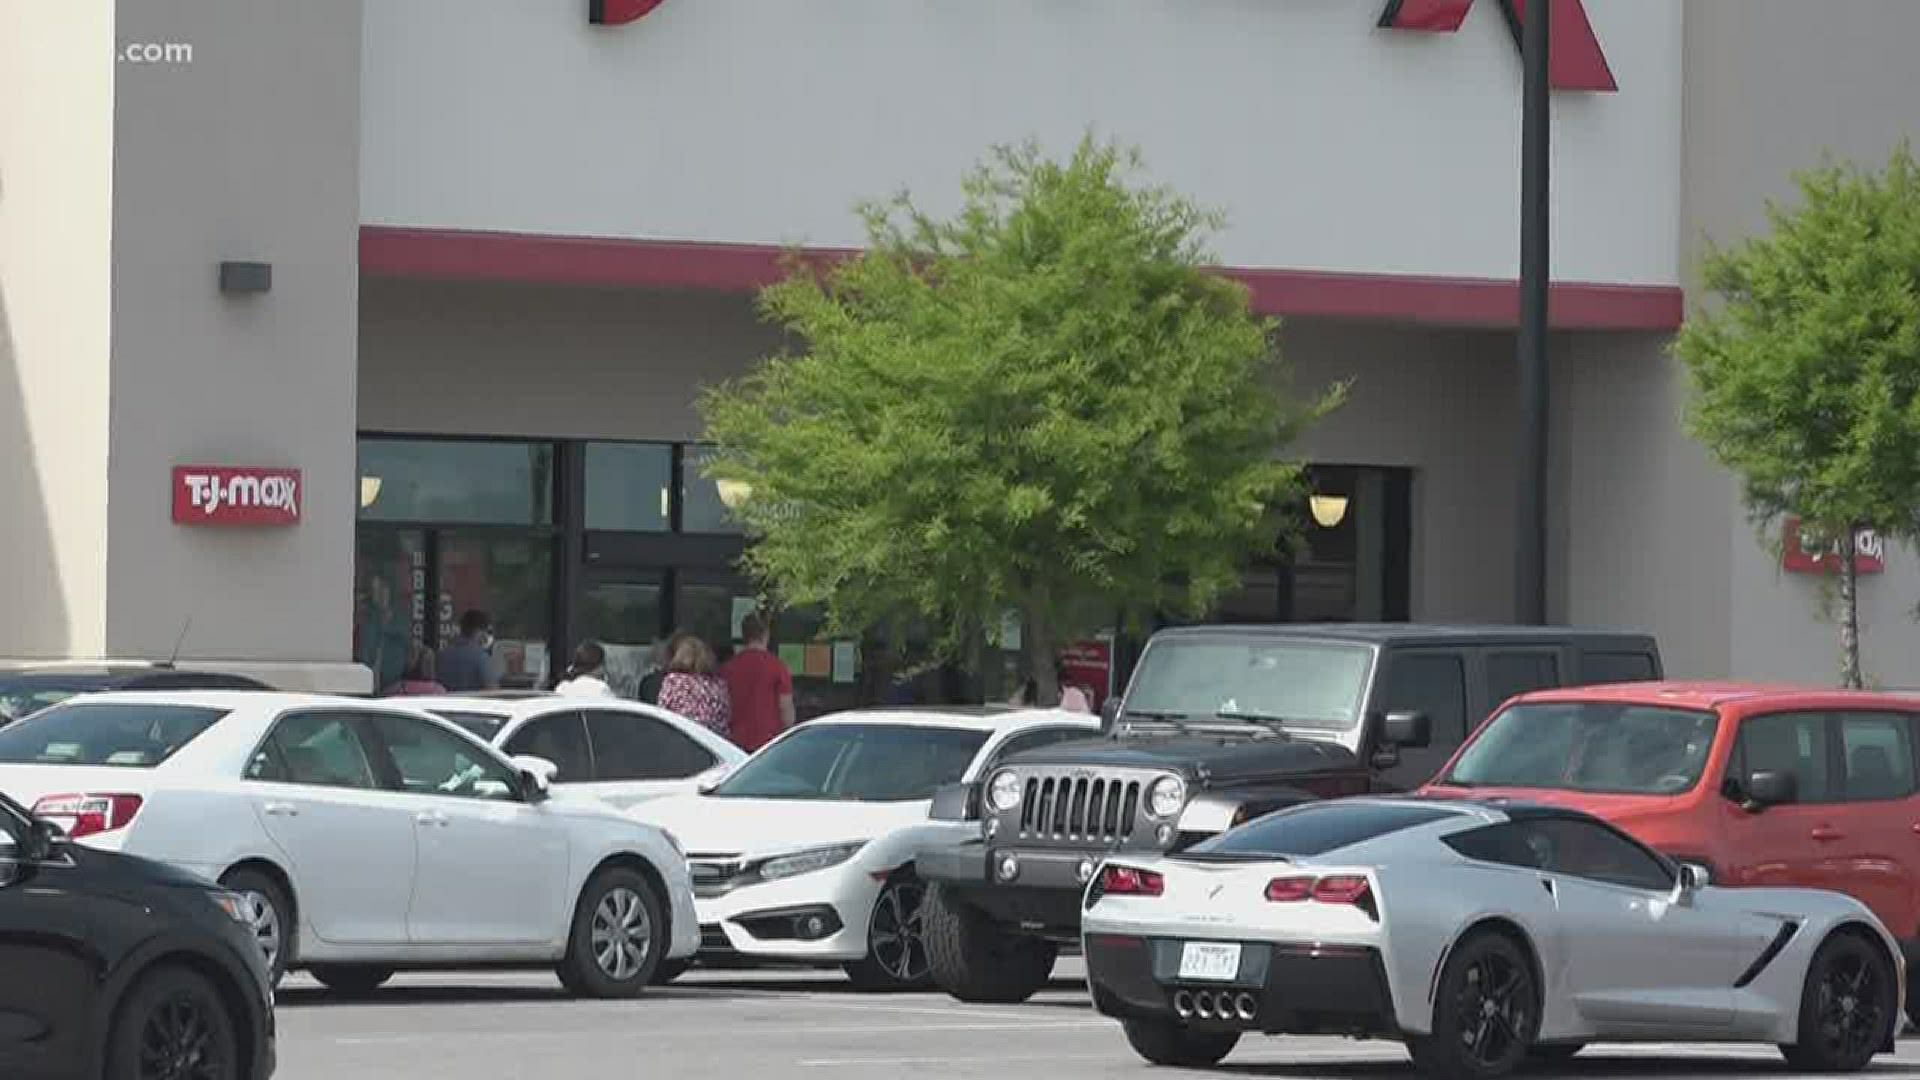 Social media posts over the weekend showed crowds and lines at some retail stores in Arkansas where people were not practicing social distancing.